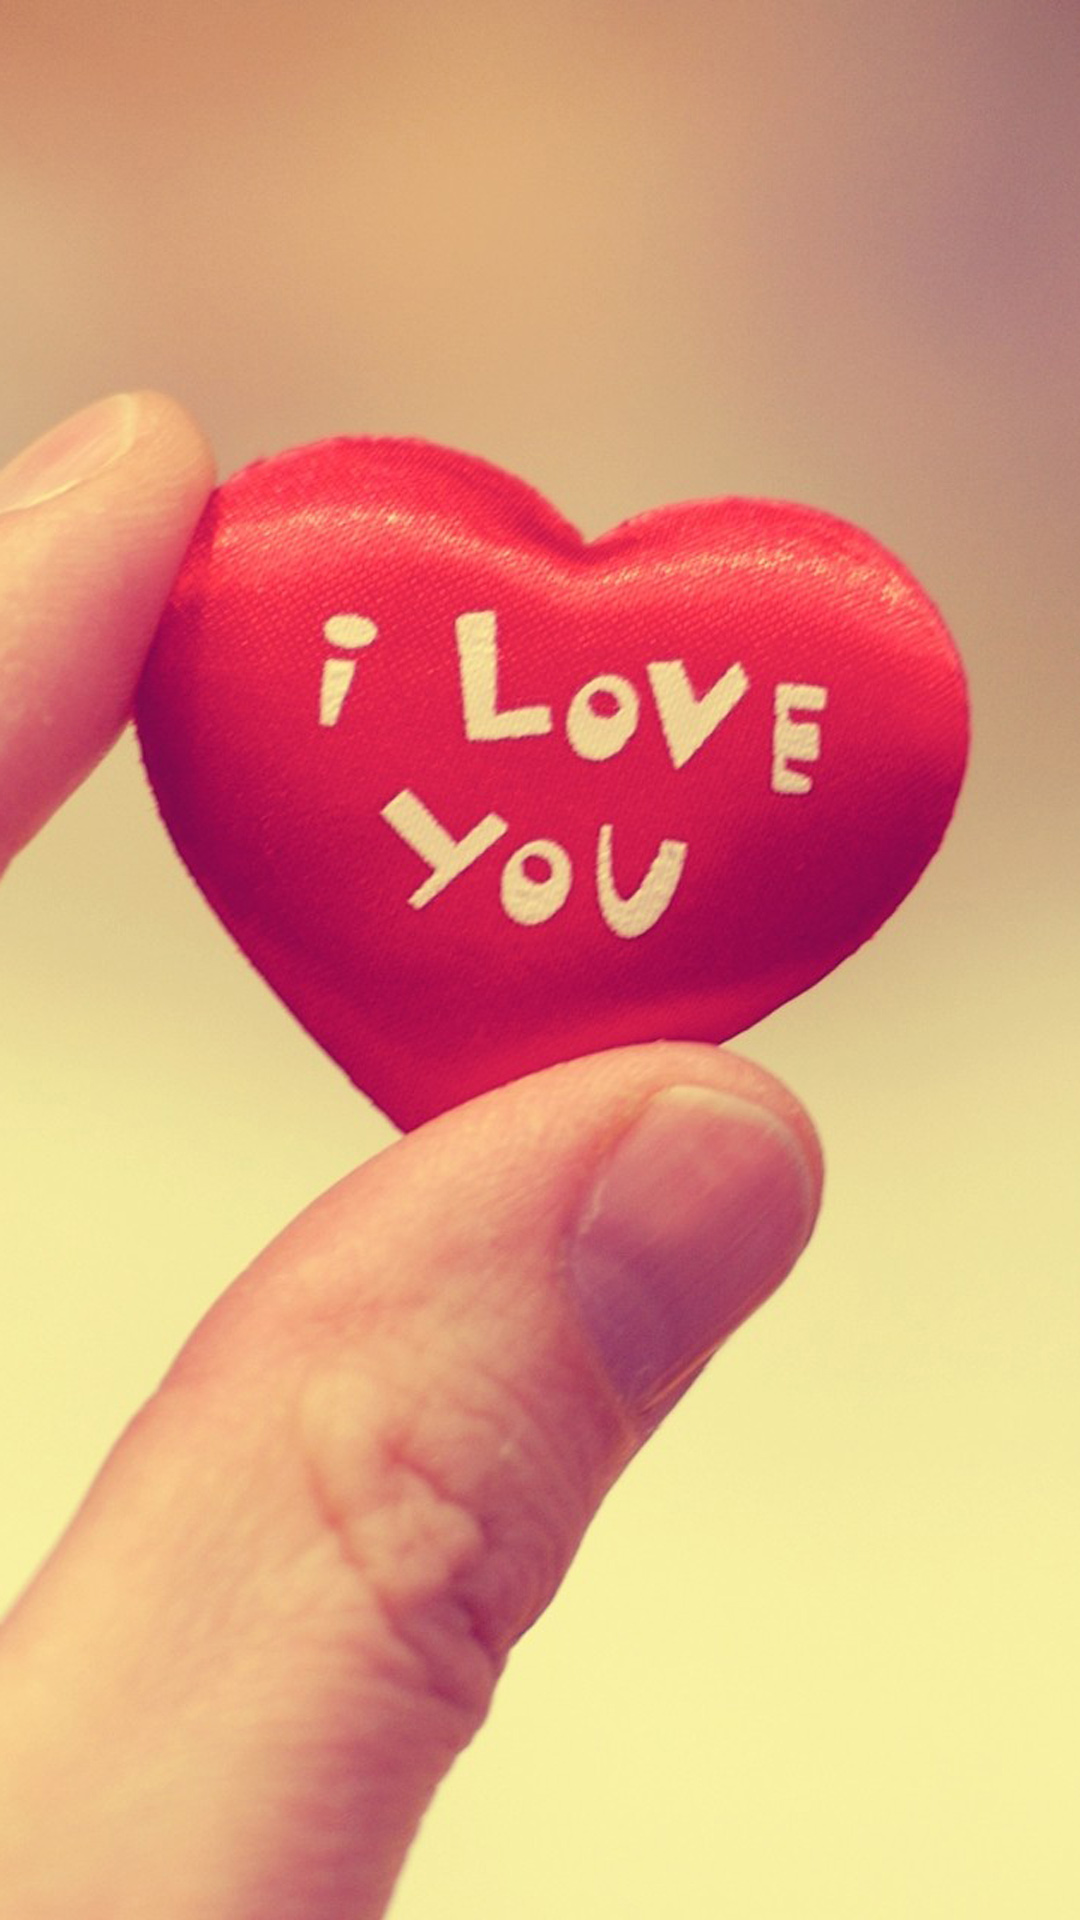 To Click On Cute I Love You Heart Then Choose Save Image As